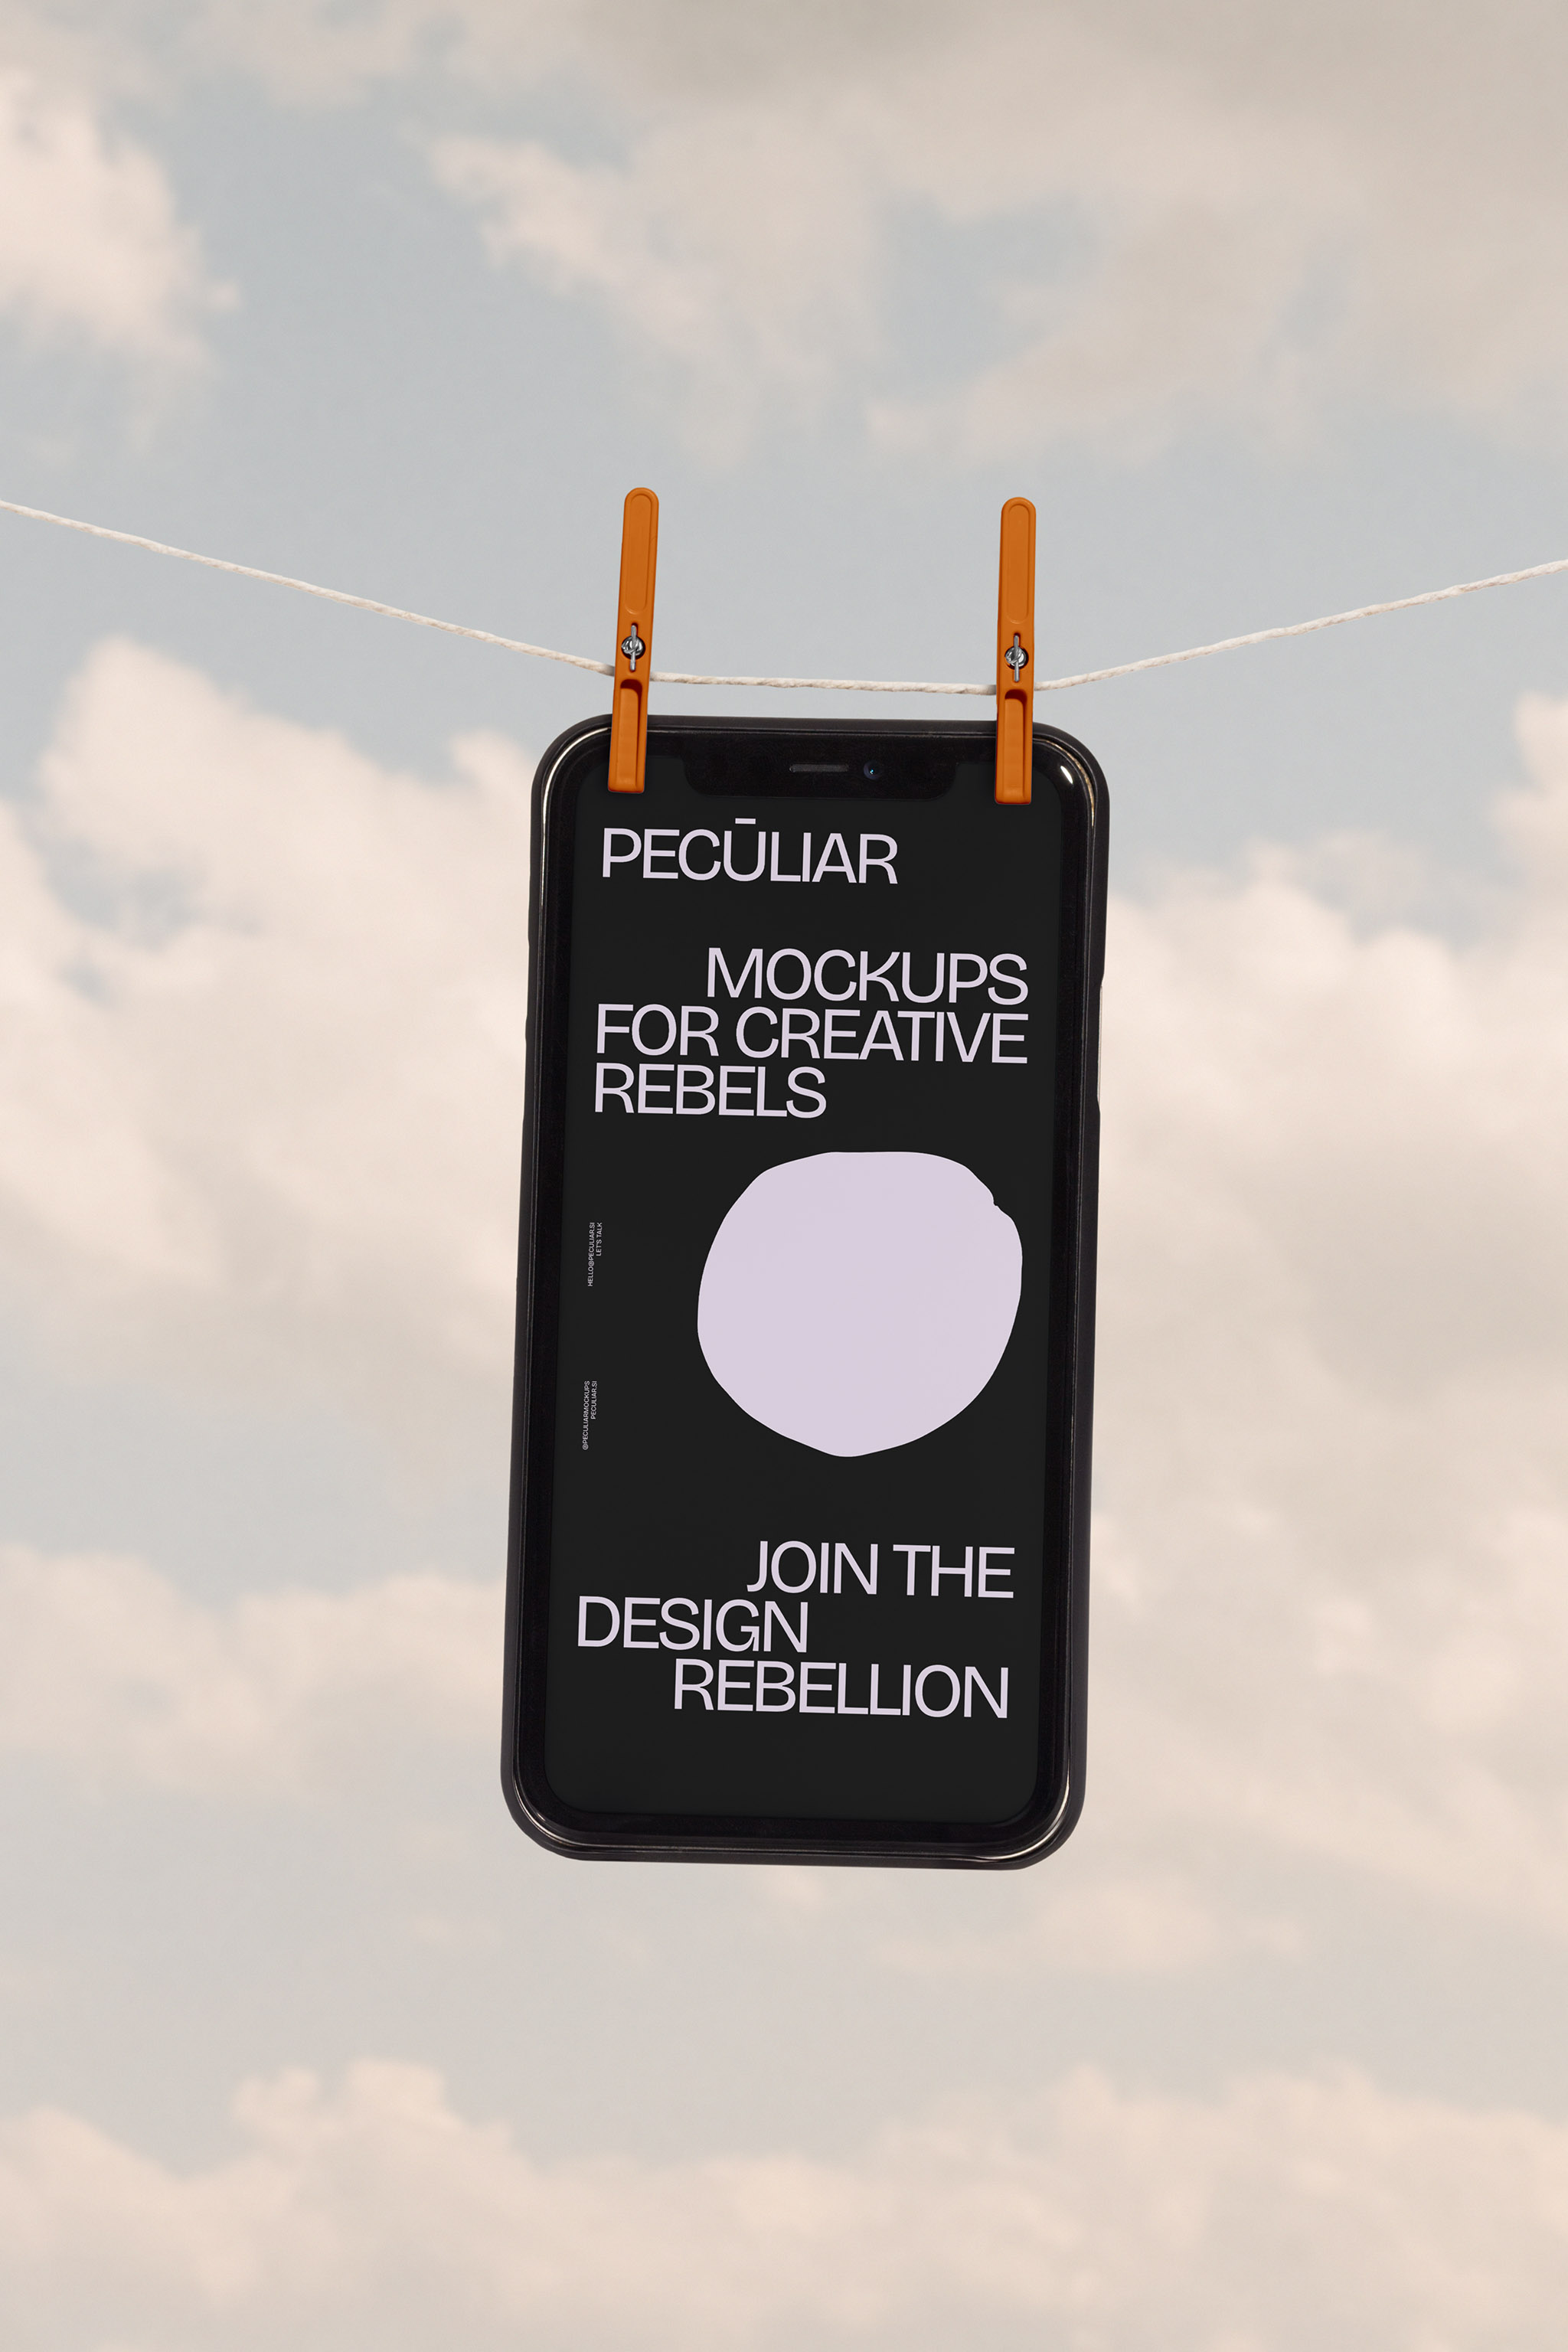 Large floating iPhone device mockup hung with clothespins in the air against a cloudy sky background, in use example.